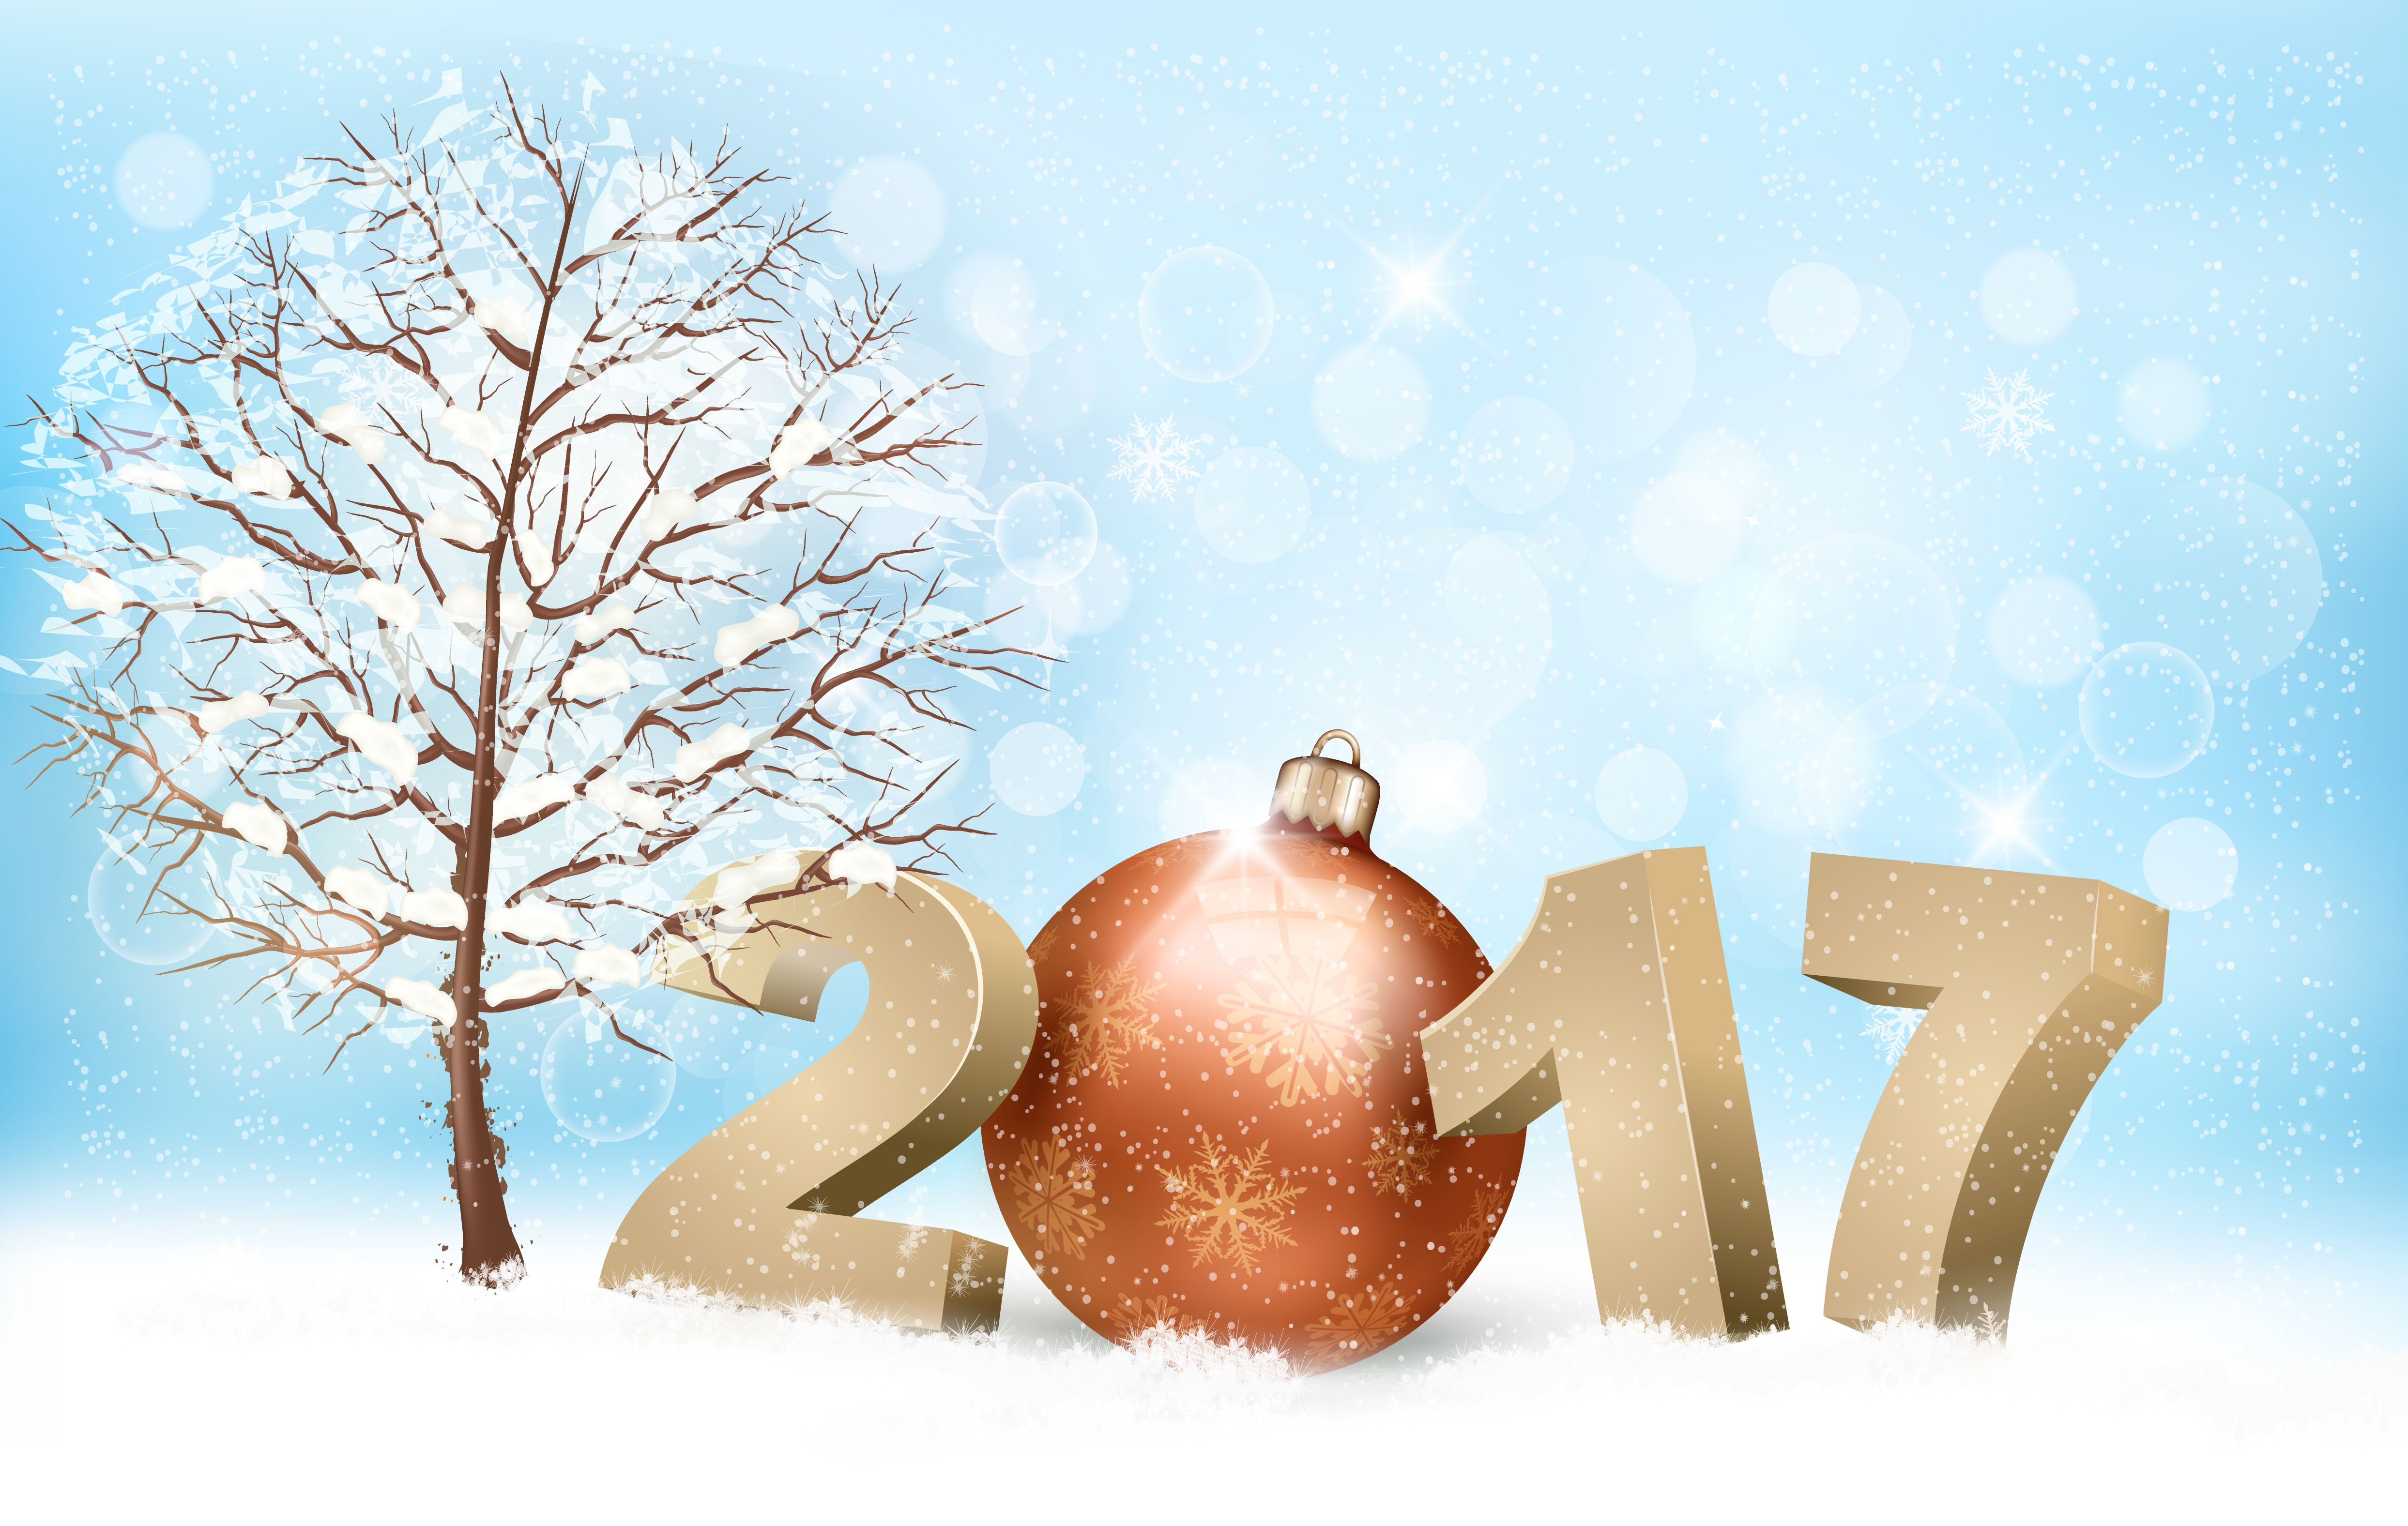 Wallpapers with the new 2017 year New Year wallpapers for 2017 happy new year on the desktop